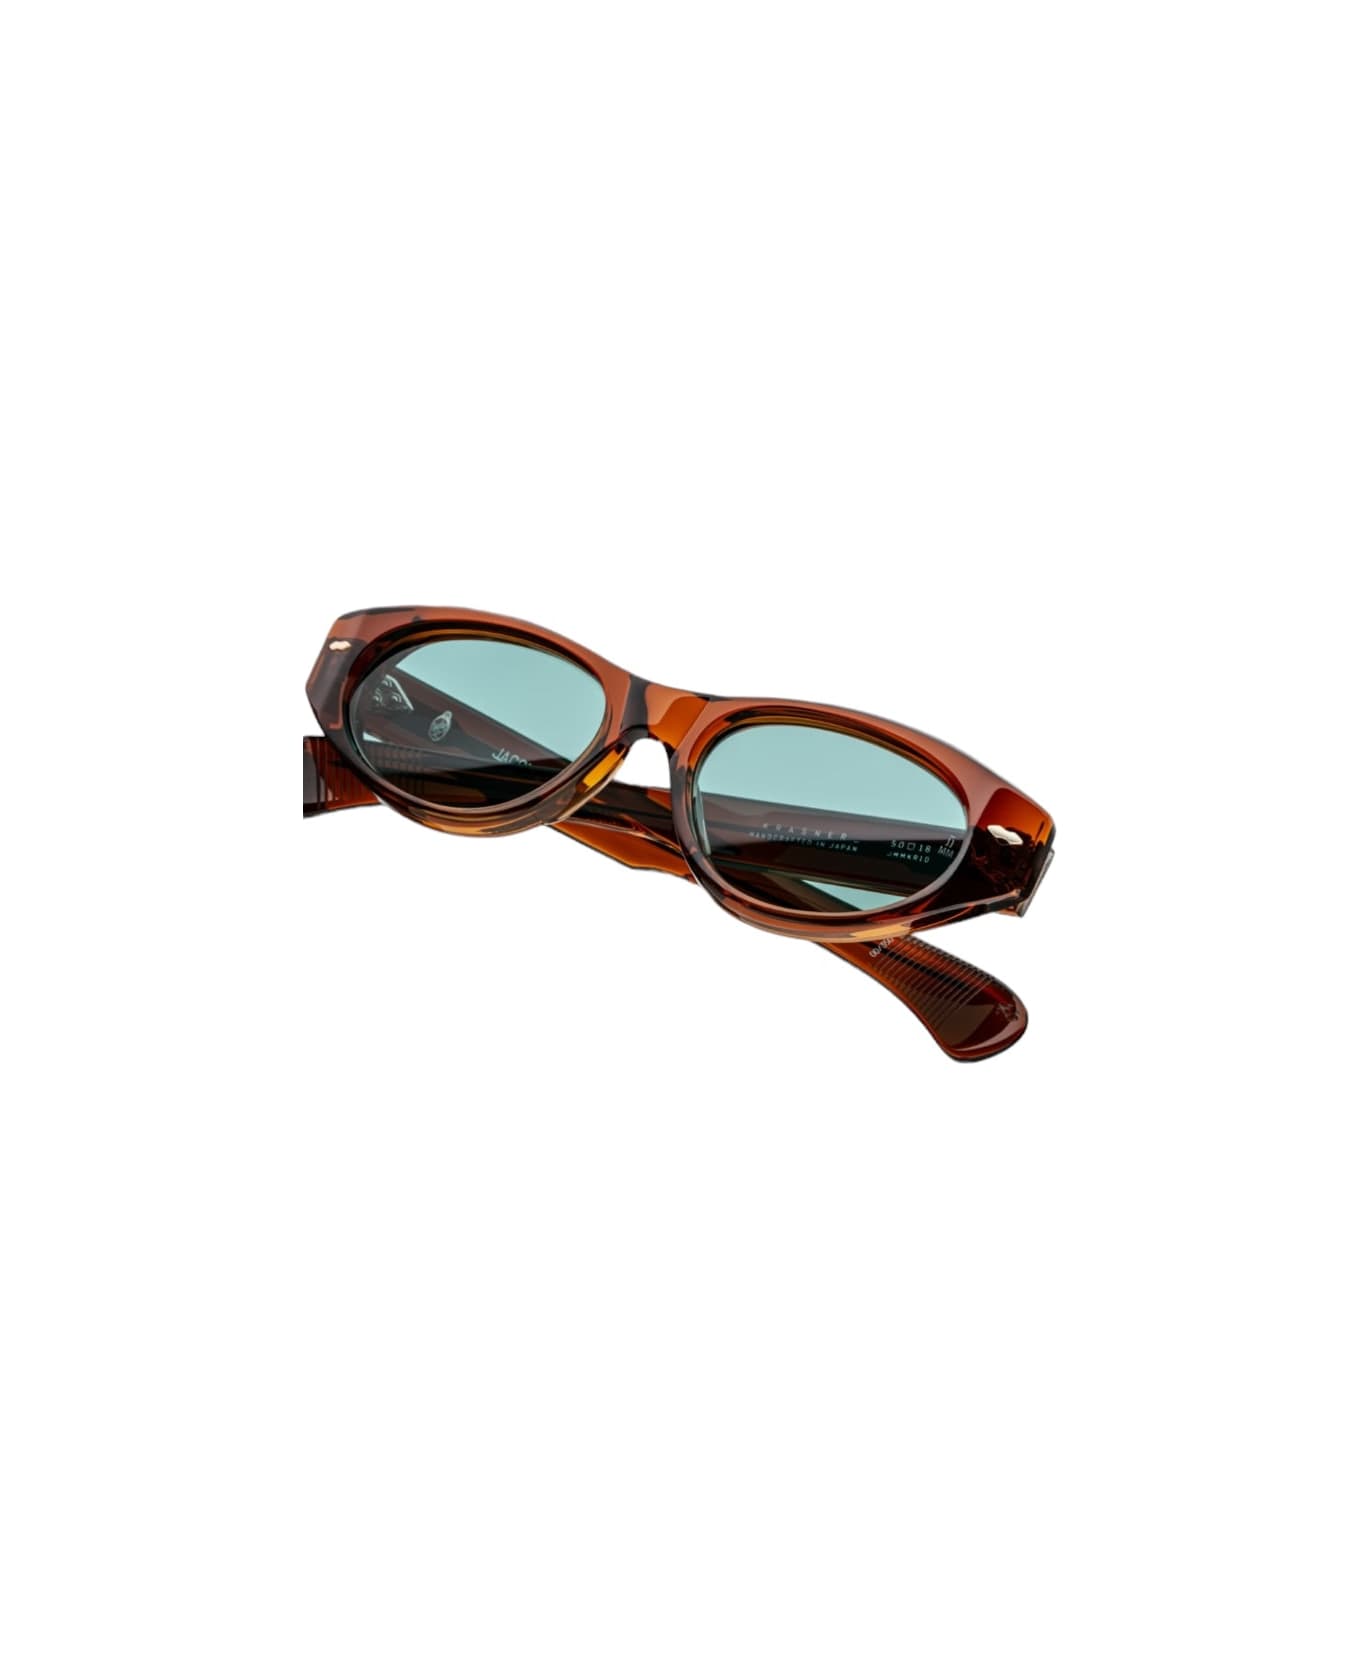 Jacques Marie Mage Krasner - Hickory Sunglasses サングラス